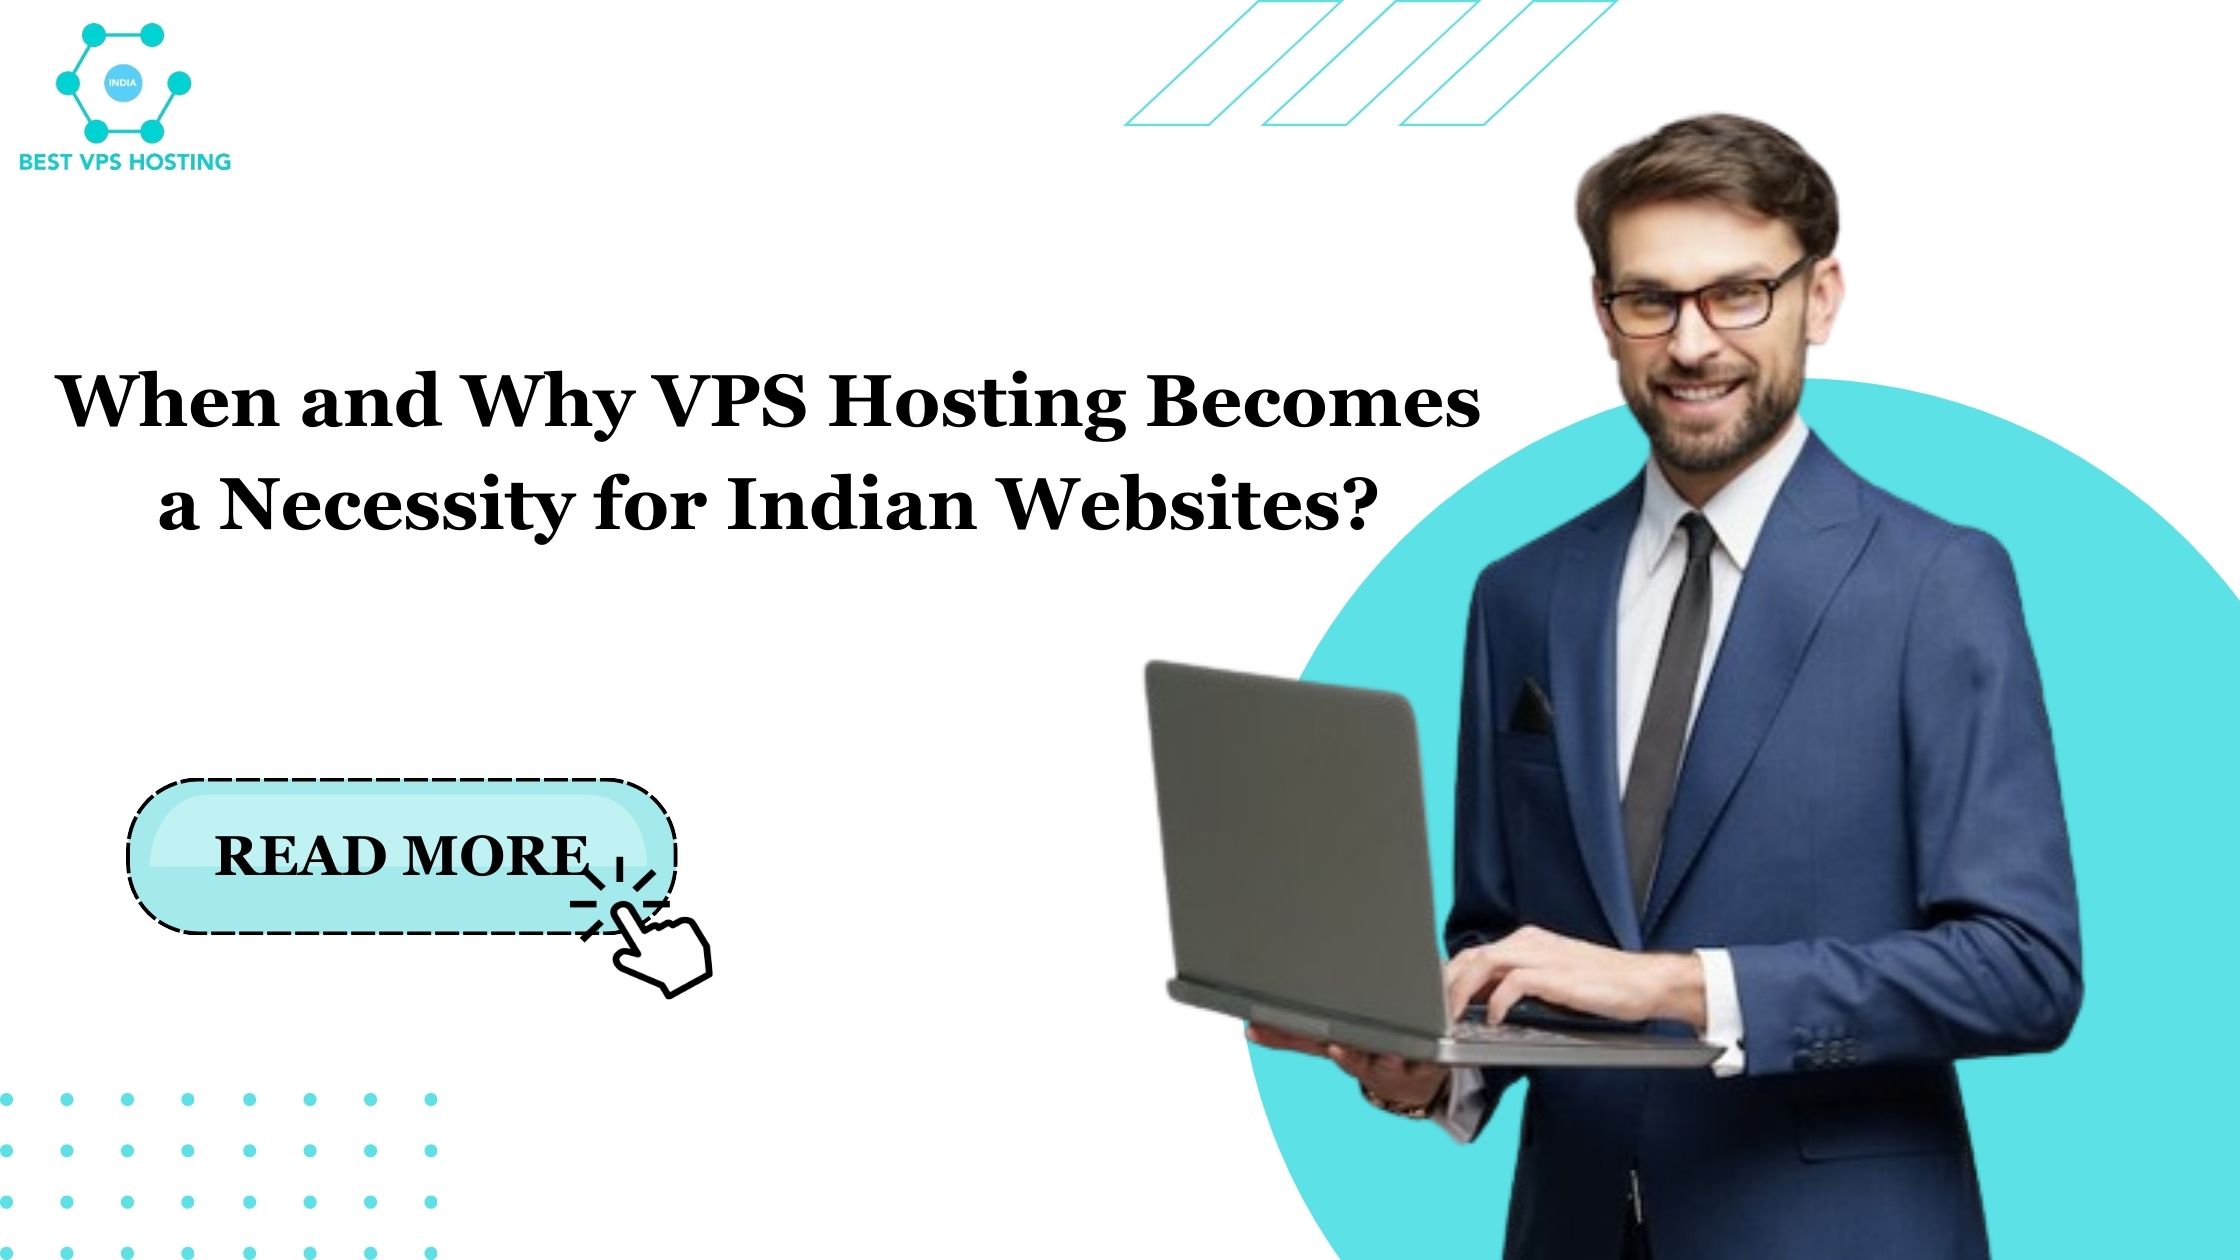 Why VPS Hosting Becomes a Necessity for Indian Websites